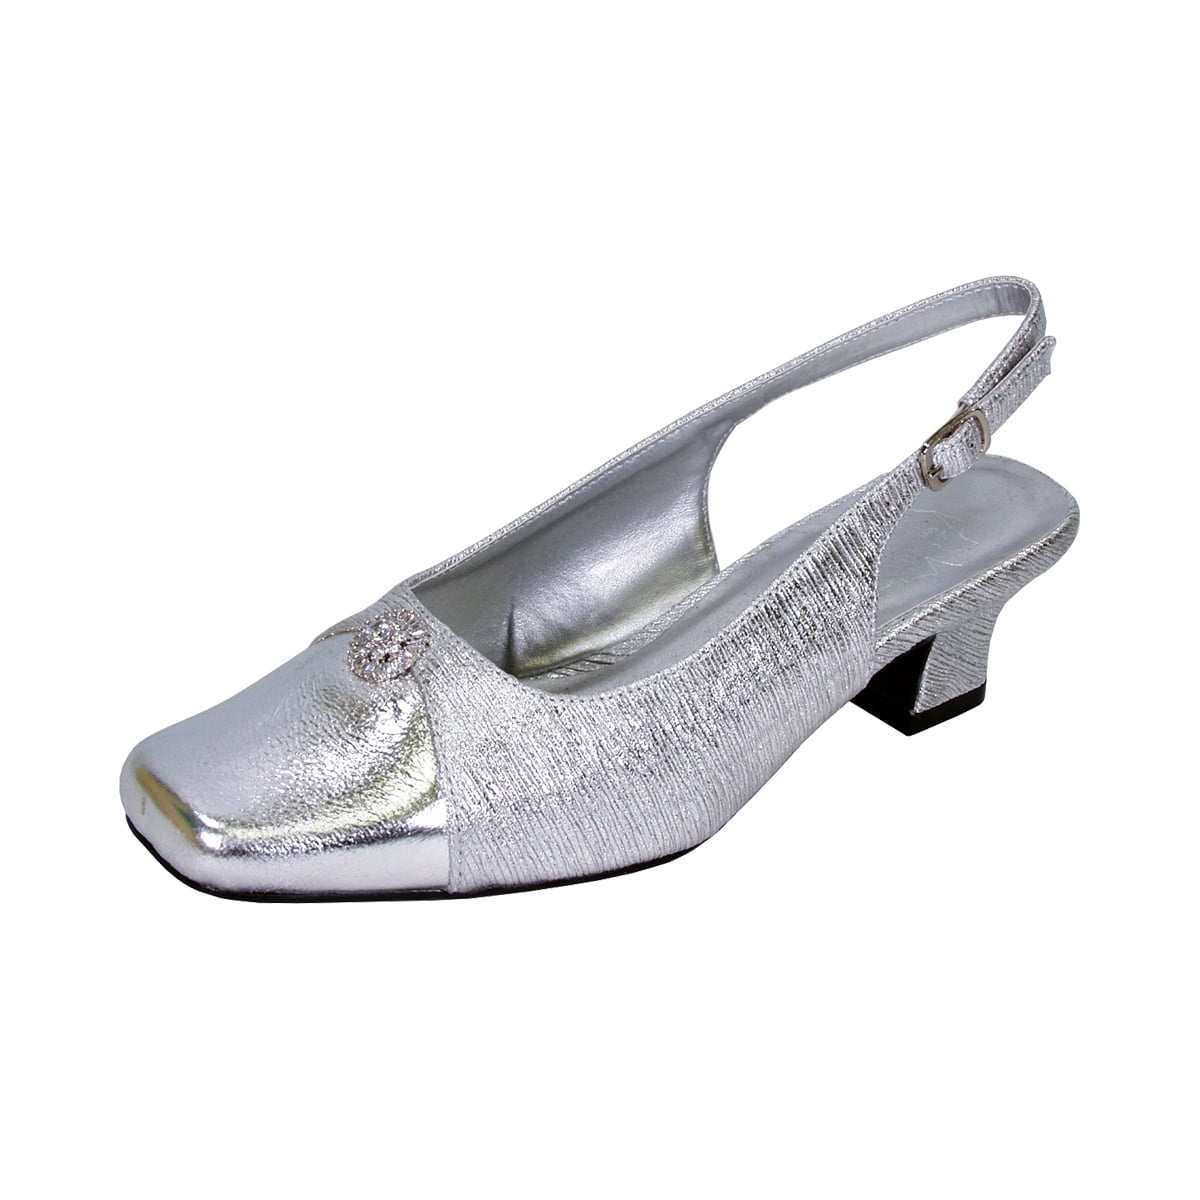 Comfortable Low Heel Wide Silver Dress Shoes For Salsa, Ballroom, Tango,  And Latin Dancing From Xiyuessy, $40.11 | DHgate.Com